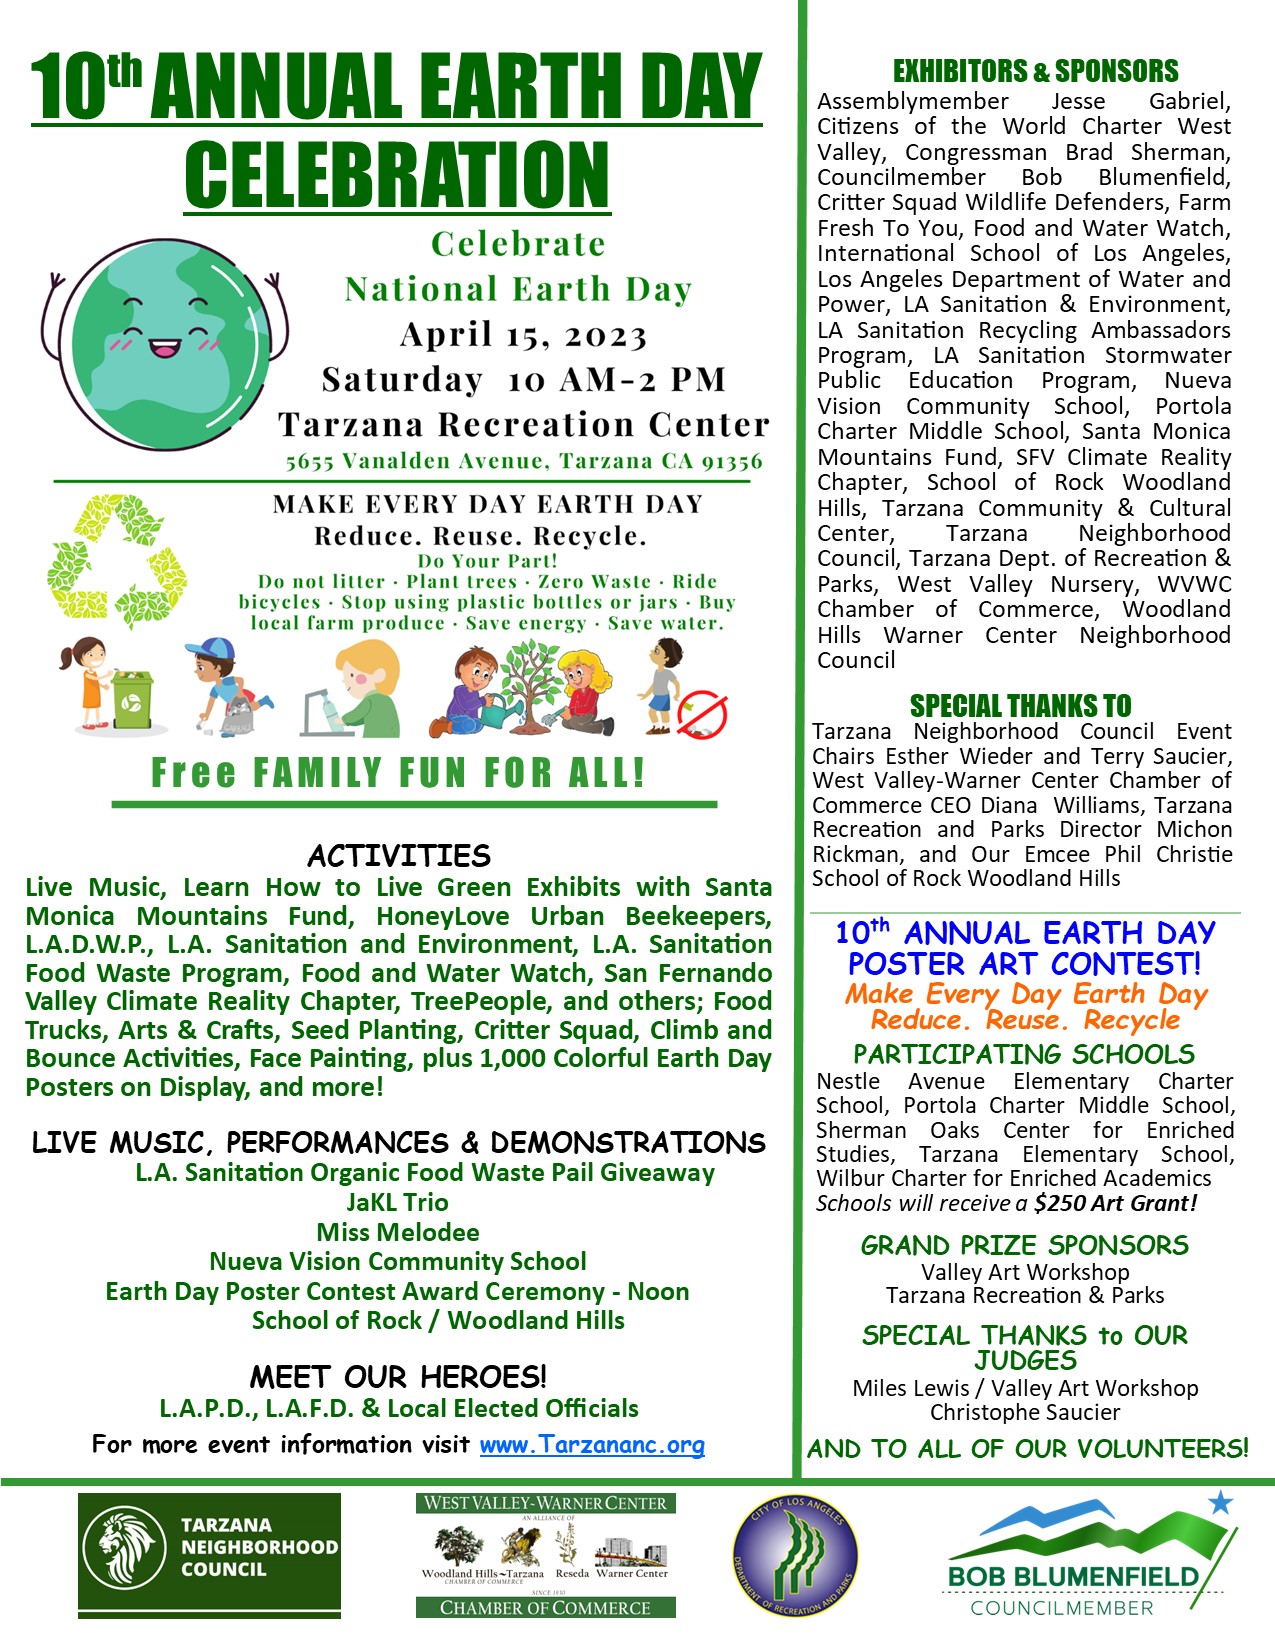 SAVE THE DATE - 10th Annual Earth Day Festival, April 15, 10AM-2PM at ...